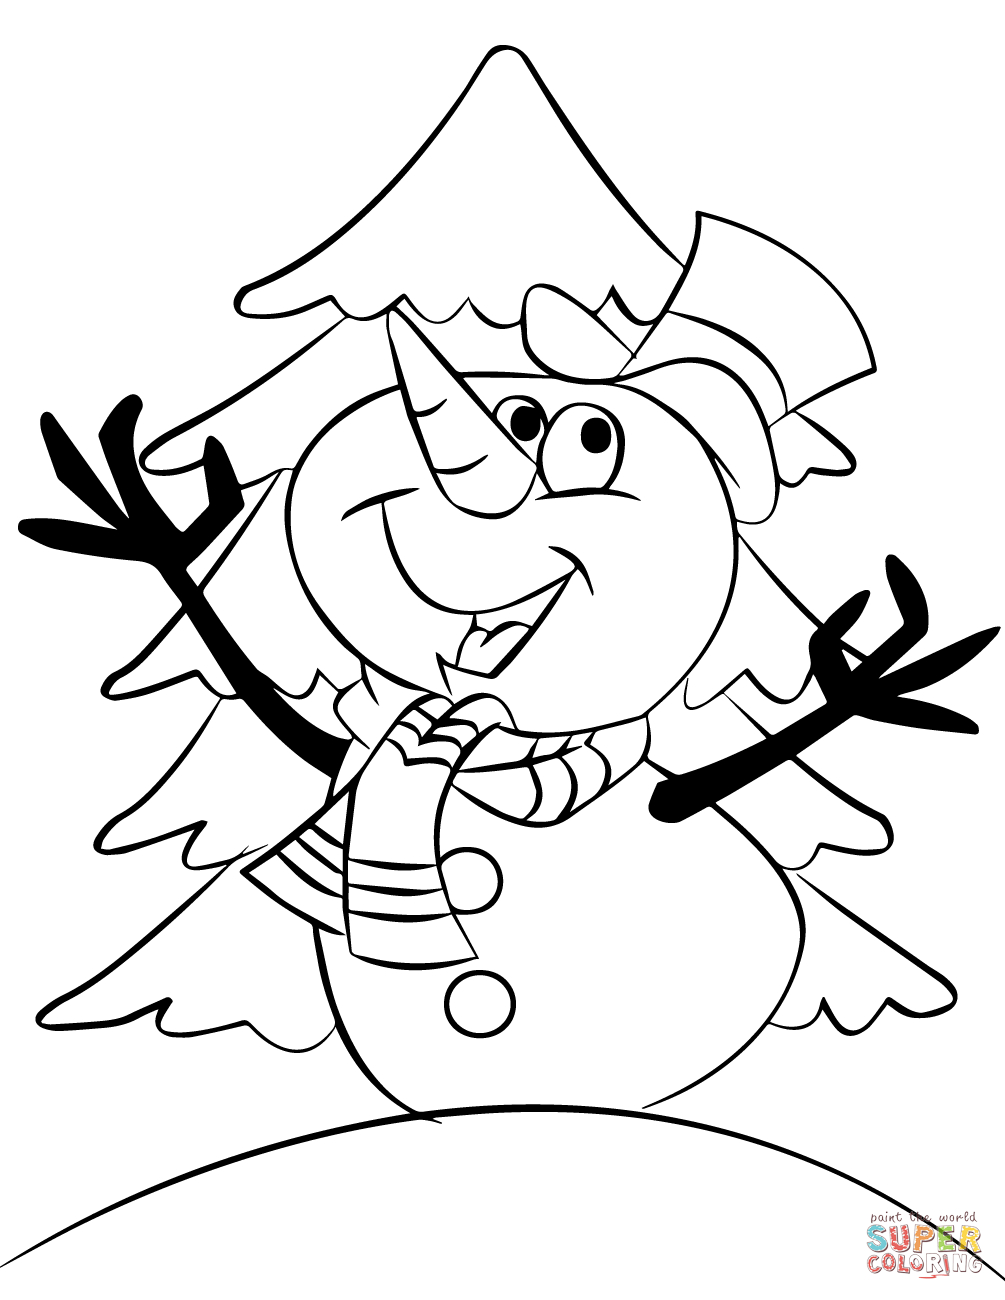 Snowmen Coloring Pages Snowman Coloring Pages Free Coloring Pages